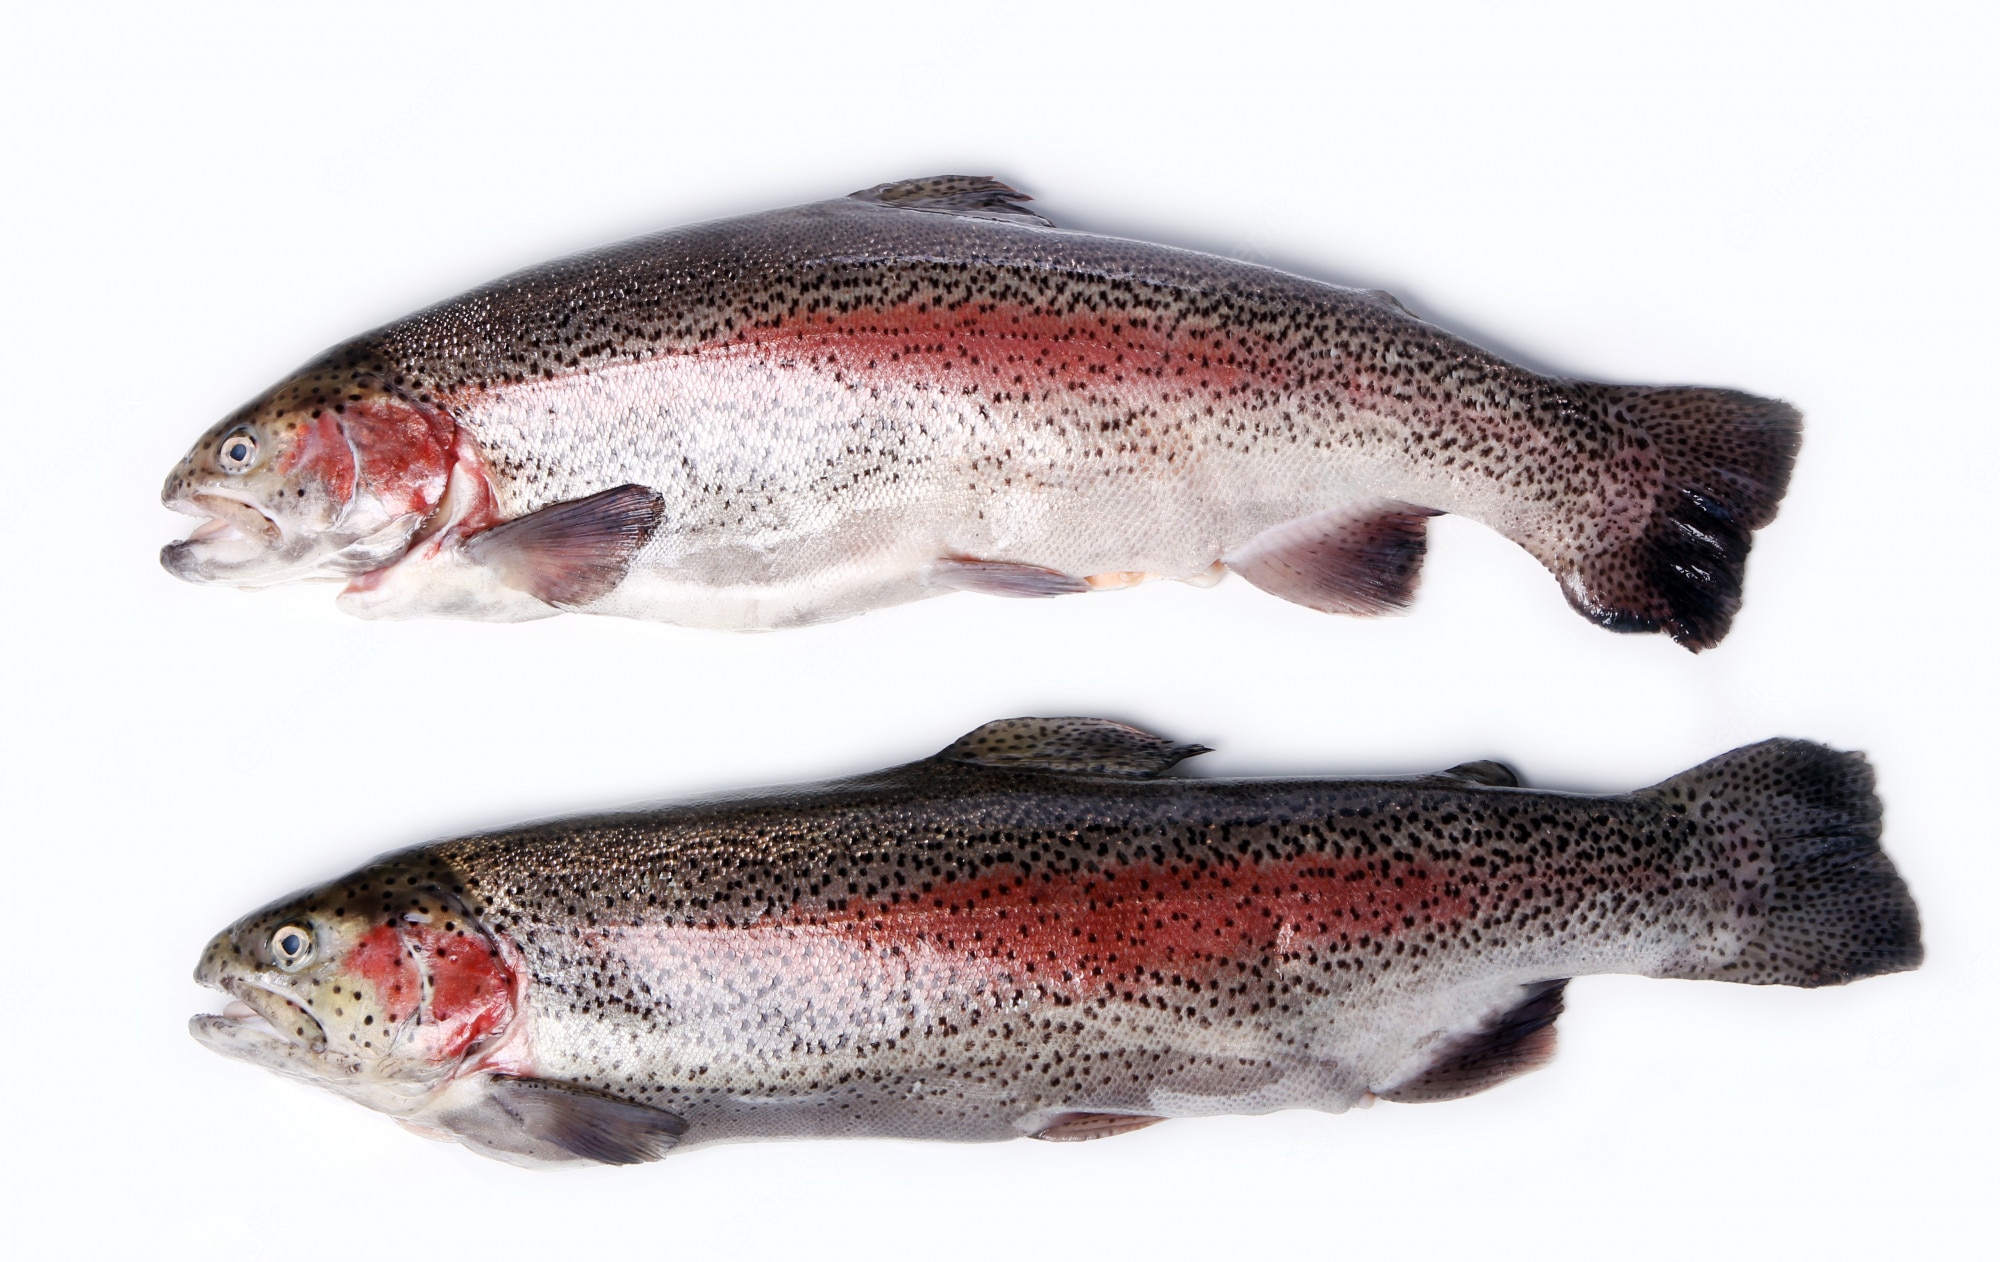 Rainbow Trout Wallpapers